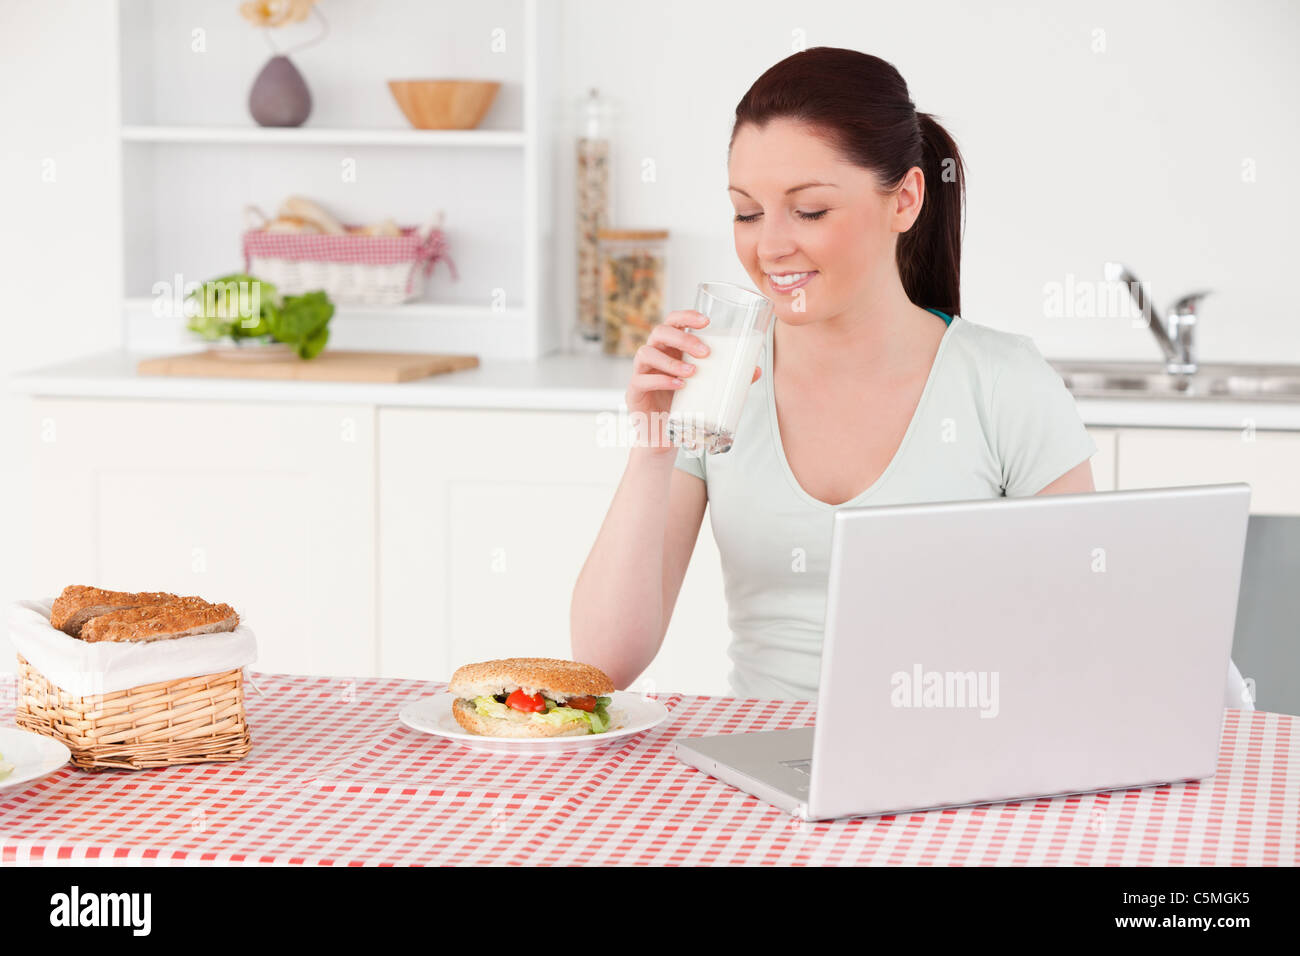 Good looking woman posing with a glass of milk while relaxing Stock Photo